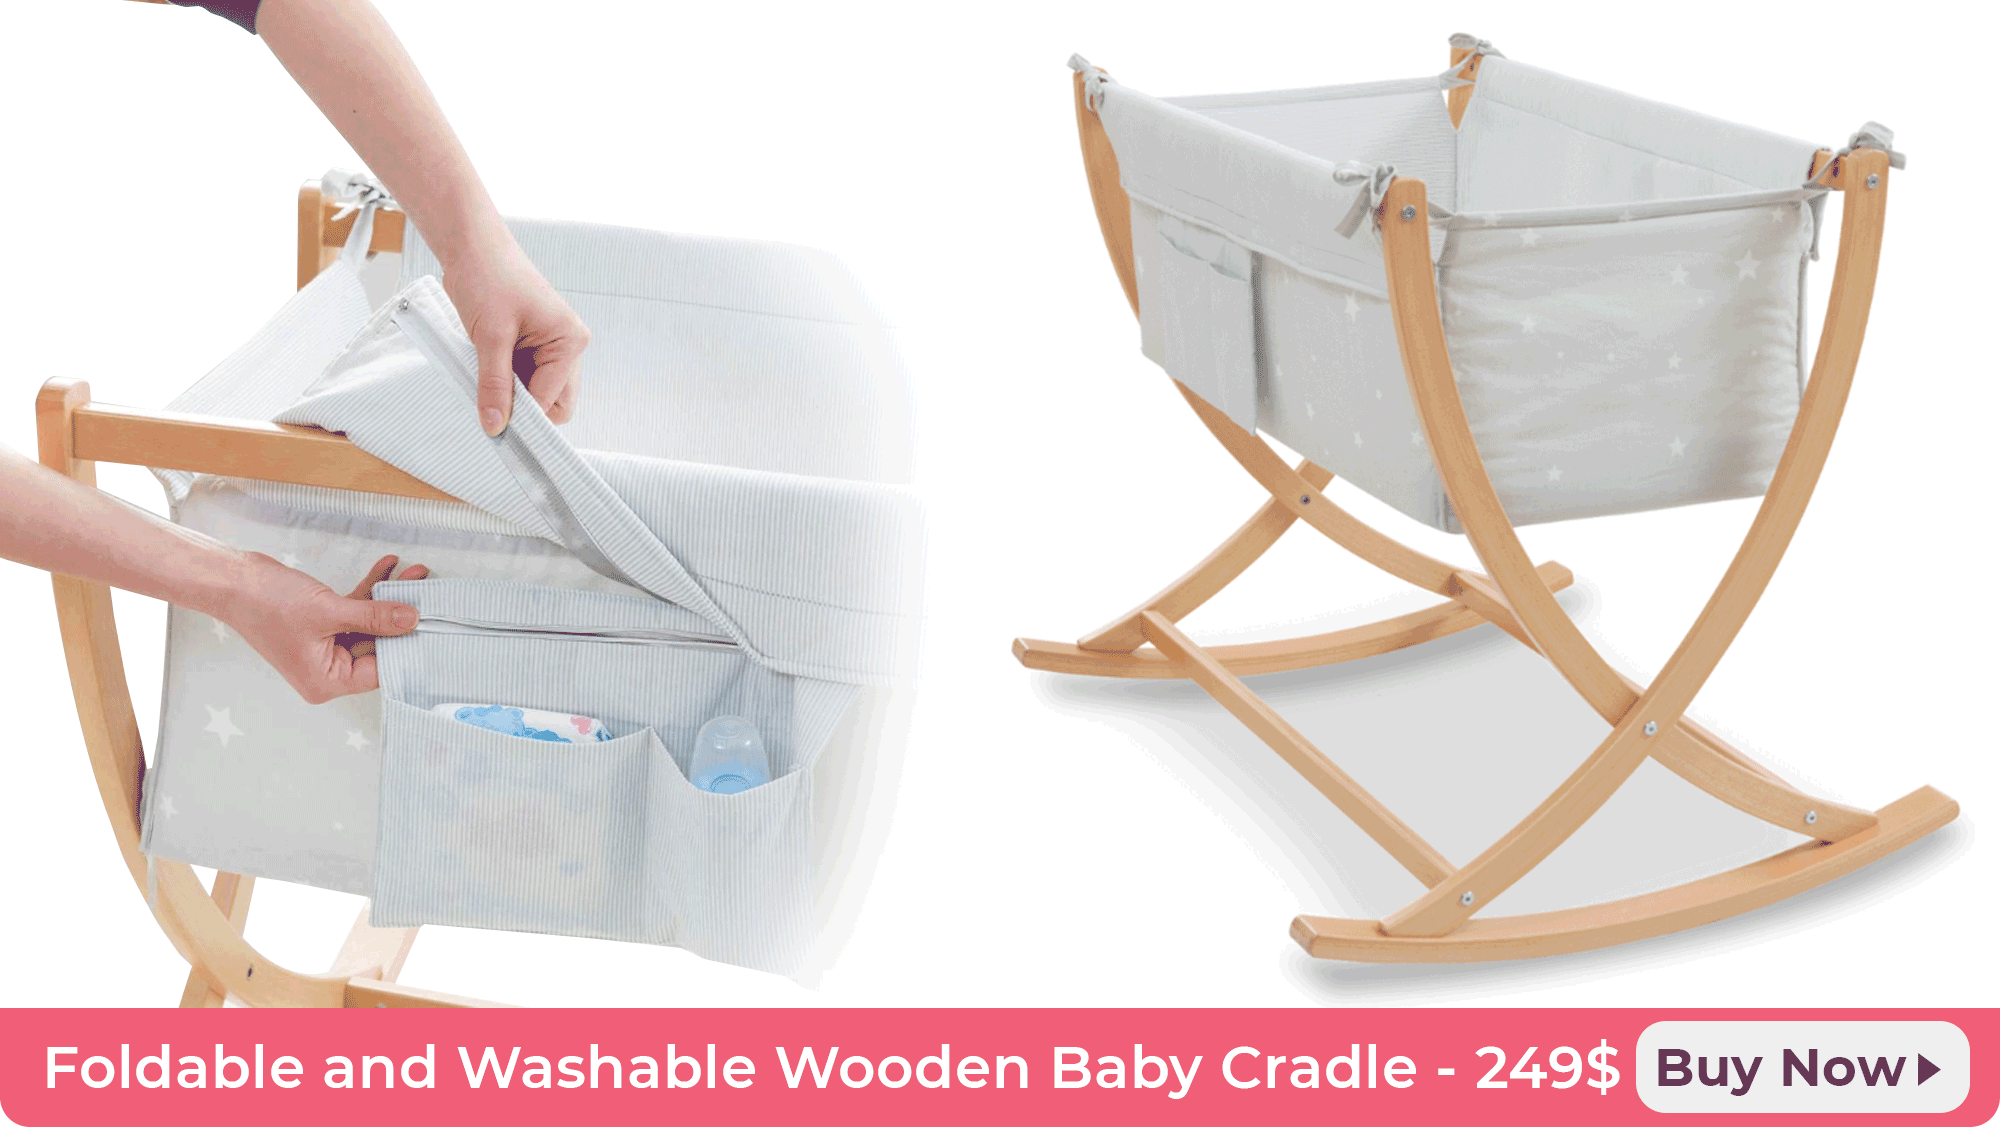 Foldable and Washable Wooden Baby Cradle